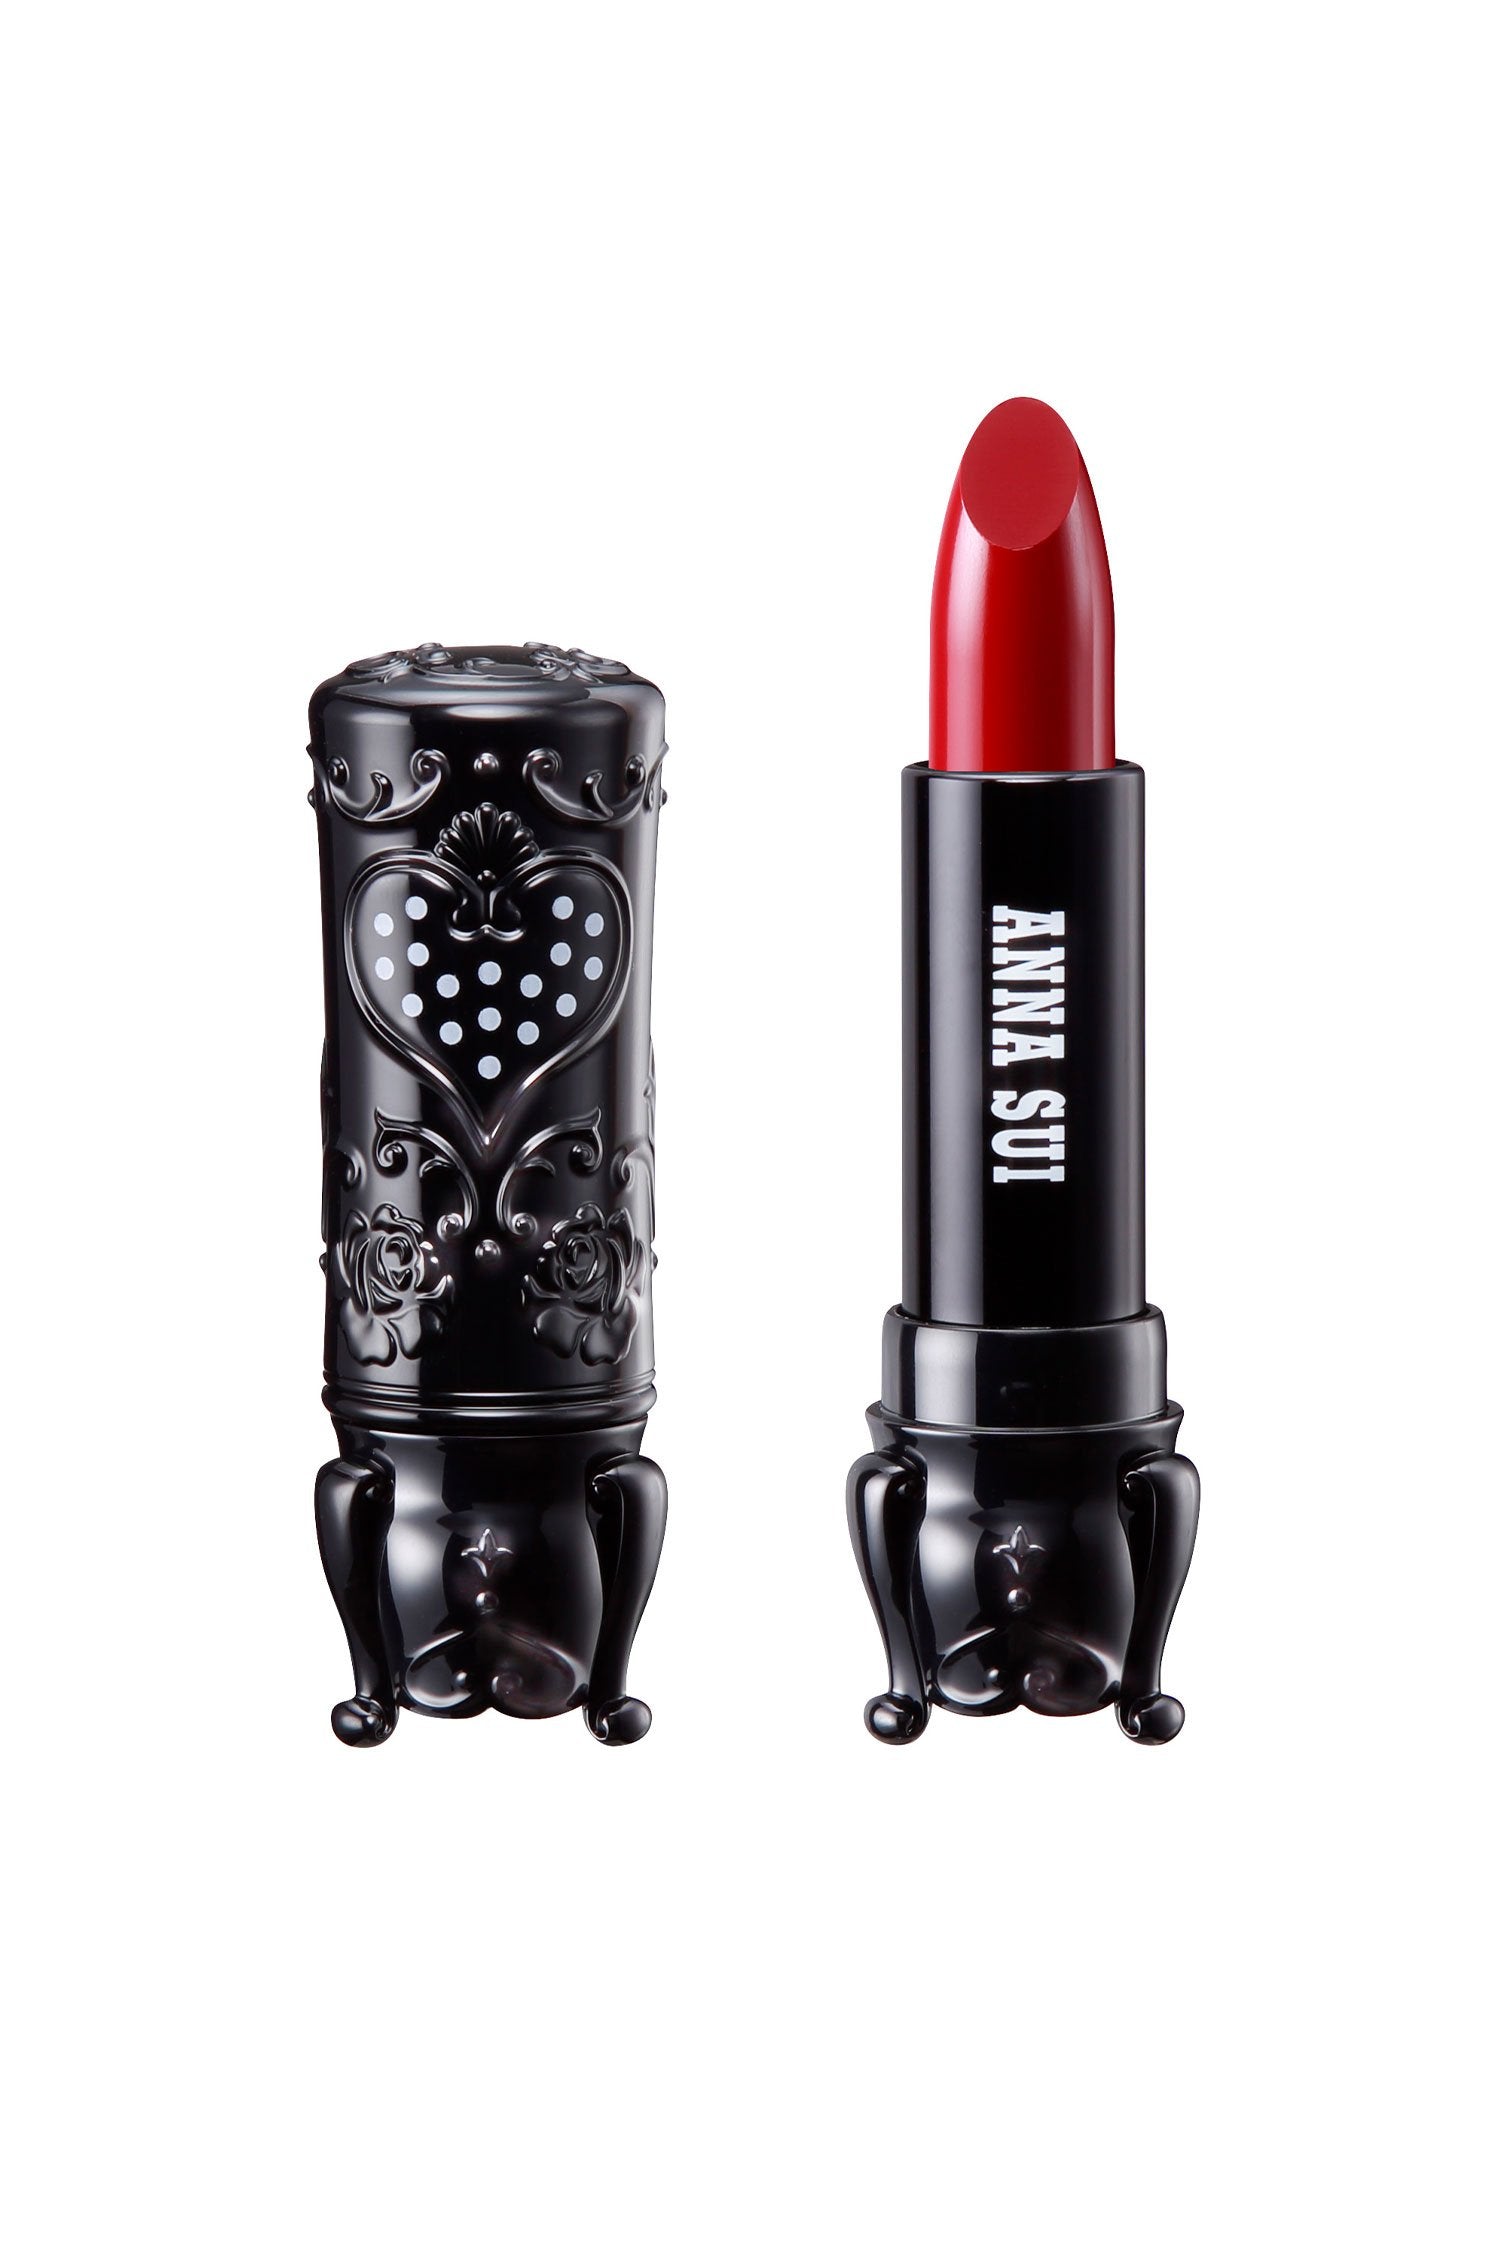 Sui Black - Rouge S 403 Bright Red in a cylindrical case, with 3 legs, a heart with white dots and floral design on the cap